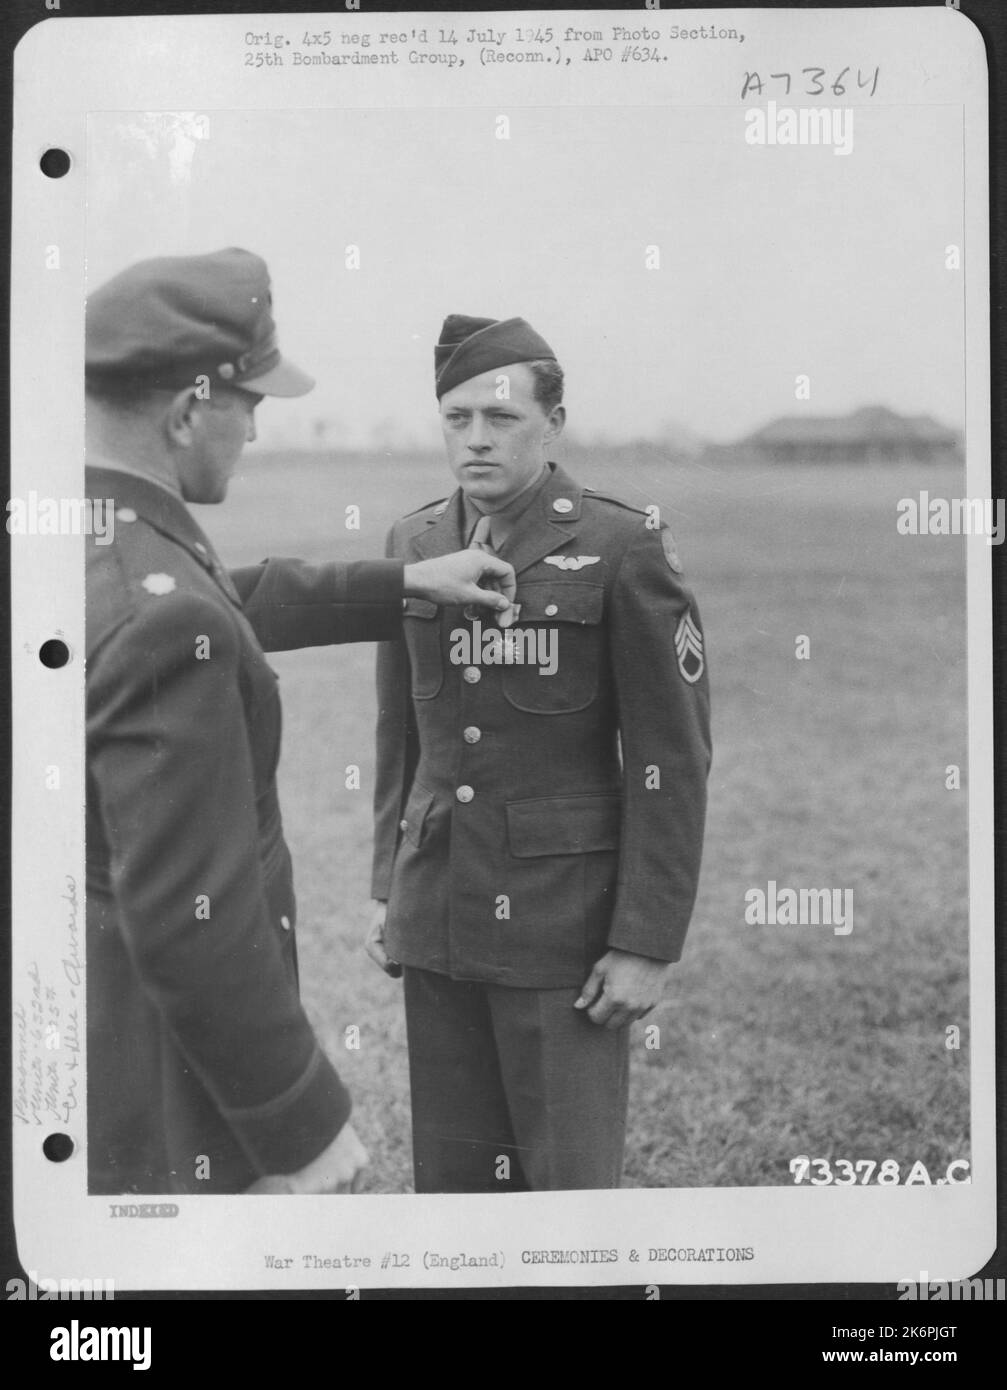 S/Sgt. M. Hunt Of The 652Nd Weather Reconnaissance Squadron, 25Th Weather Reconnaissance Group, Is Presented The Air Medal At An 8Th Air Force Base In England. 10 June 1944. Stock Photo